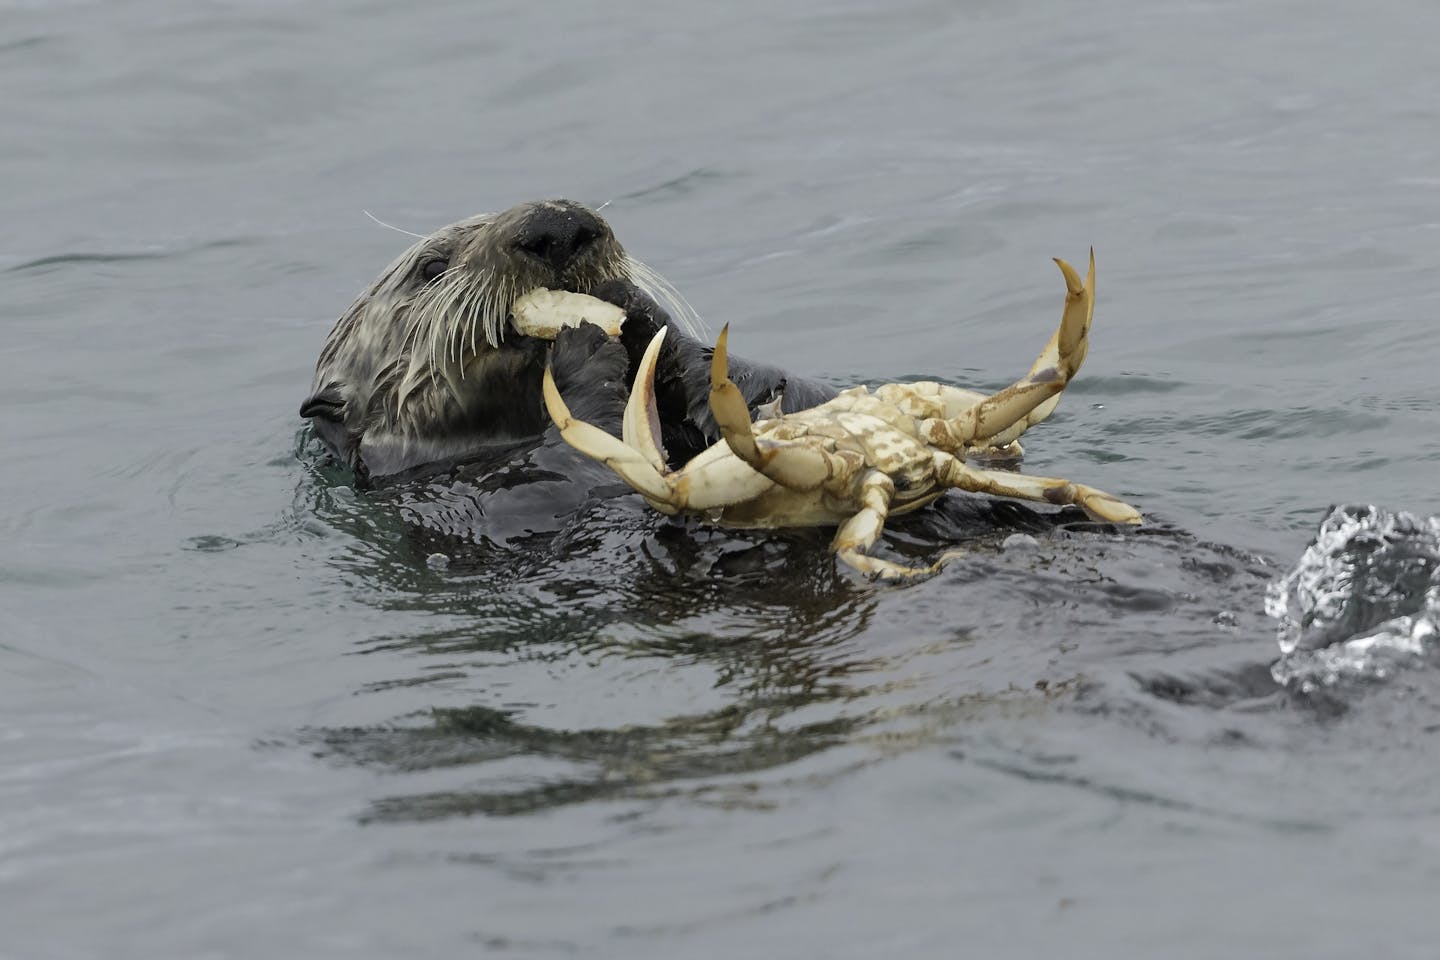 A sea otter floating on its back eating a crab.